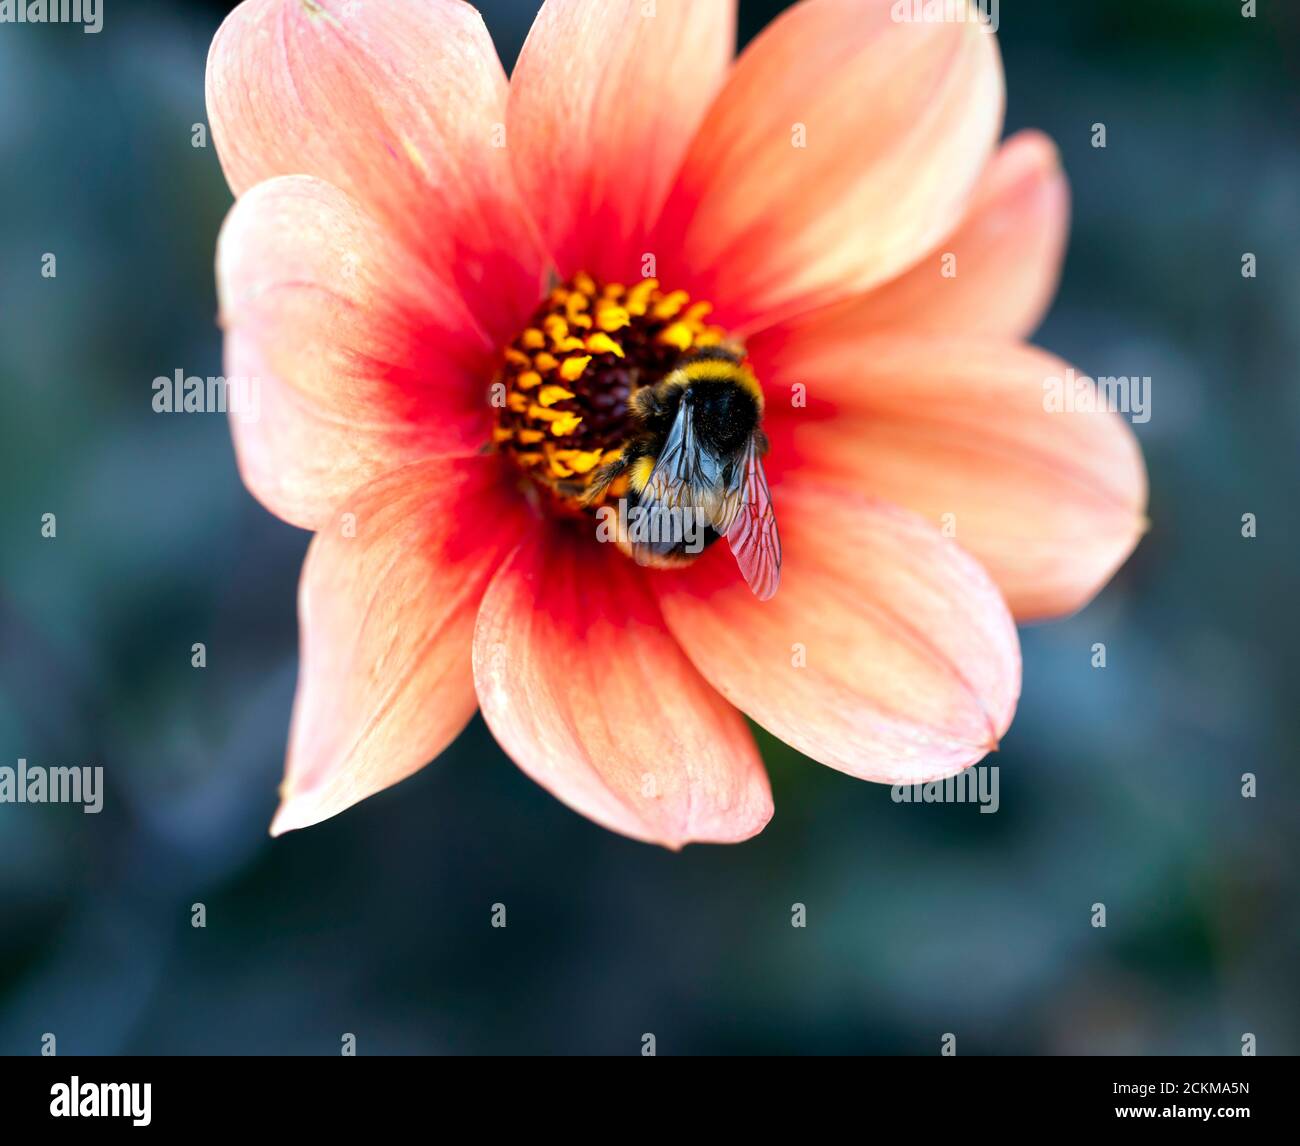 Macro image of a Bee foraging for pollen on a Single Dahlia Flower at Walmer Castle Gardens Stock Photo